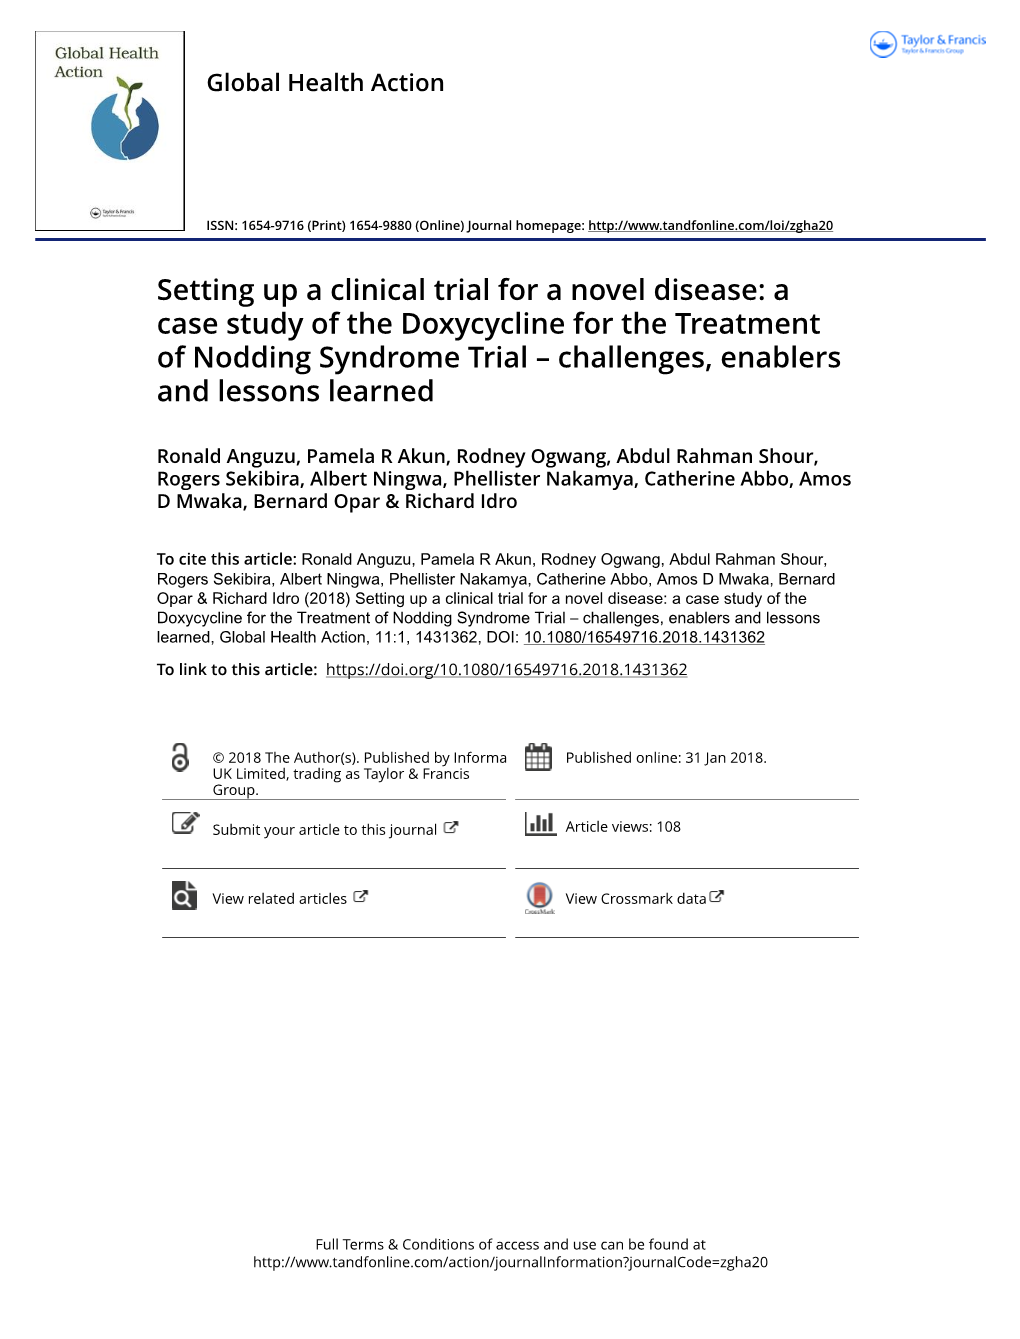 Setting up a Clinical Trial for a Novel Disease: a Case Study Of